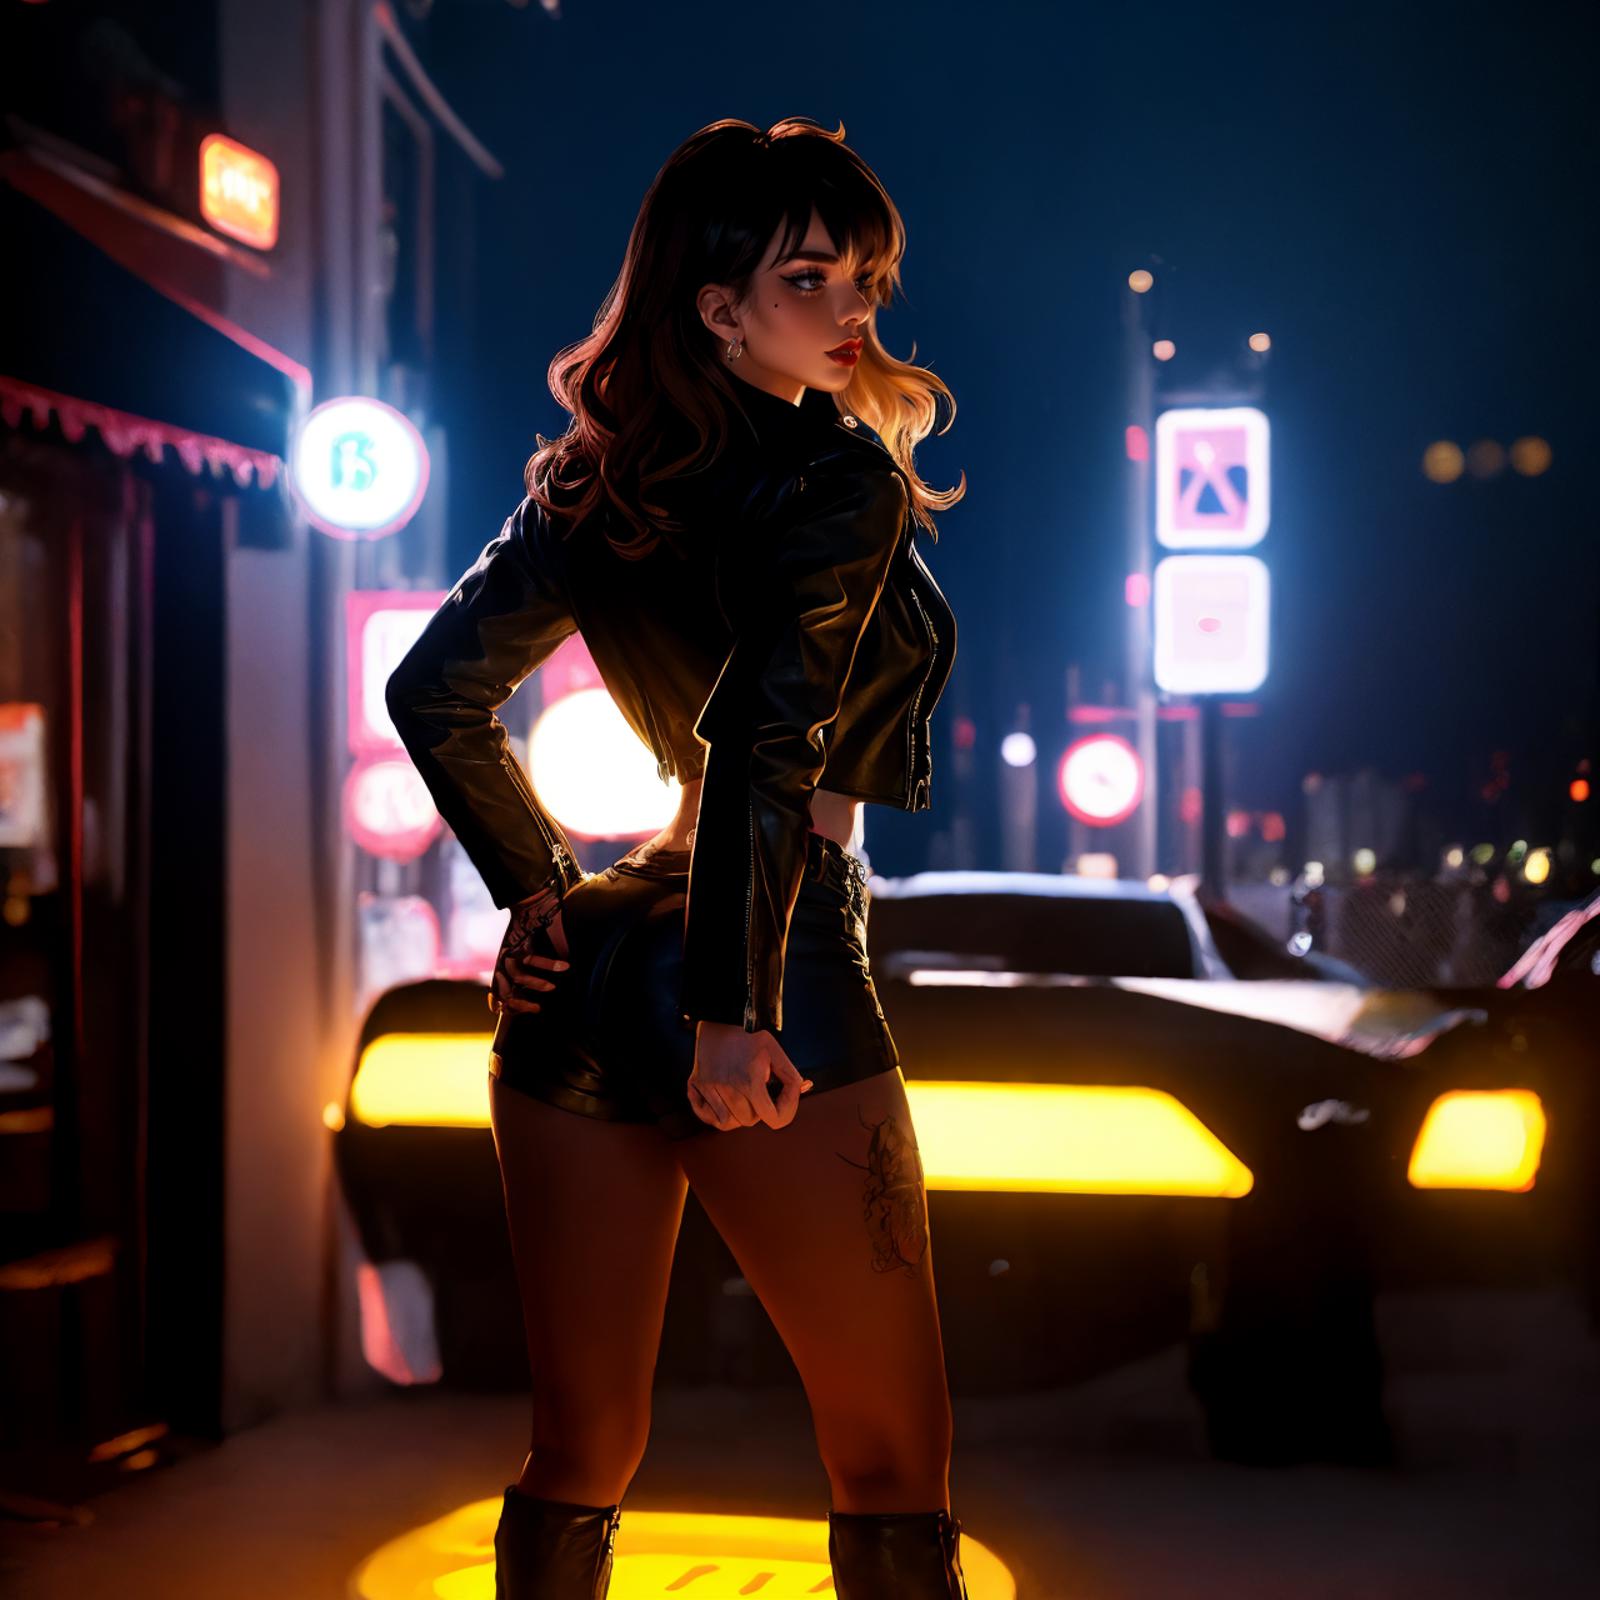 A woman wearing a black jacket and black leather pants stands in front of a black car.